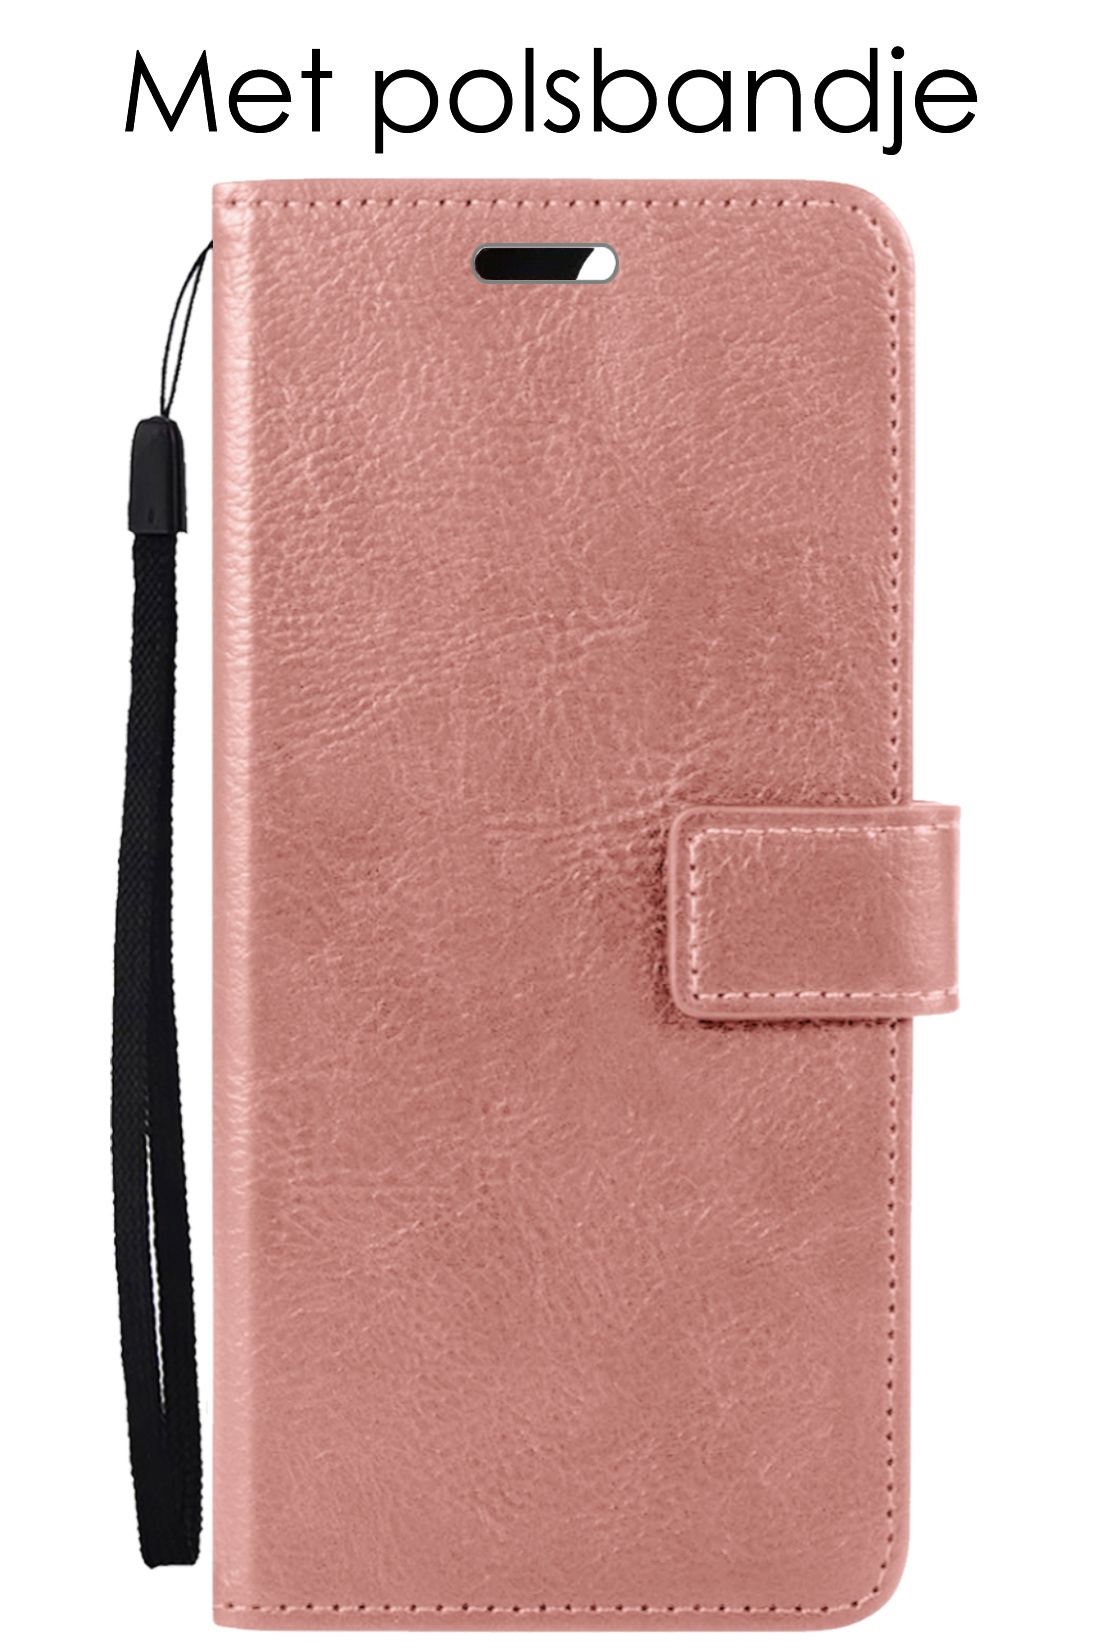 Samsung Galaxy S23 Ultra Hoesje Book Case Hoes Flip Cover Bookcase 2x Met Screenprotector - Rose Goud